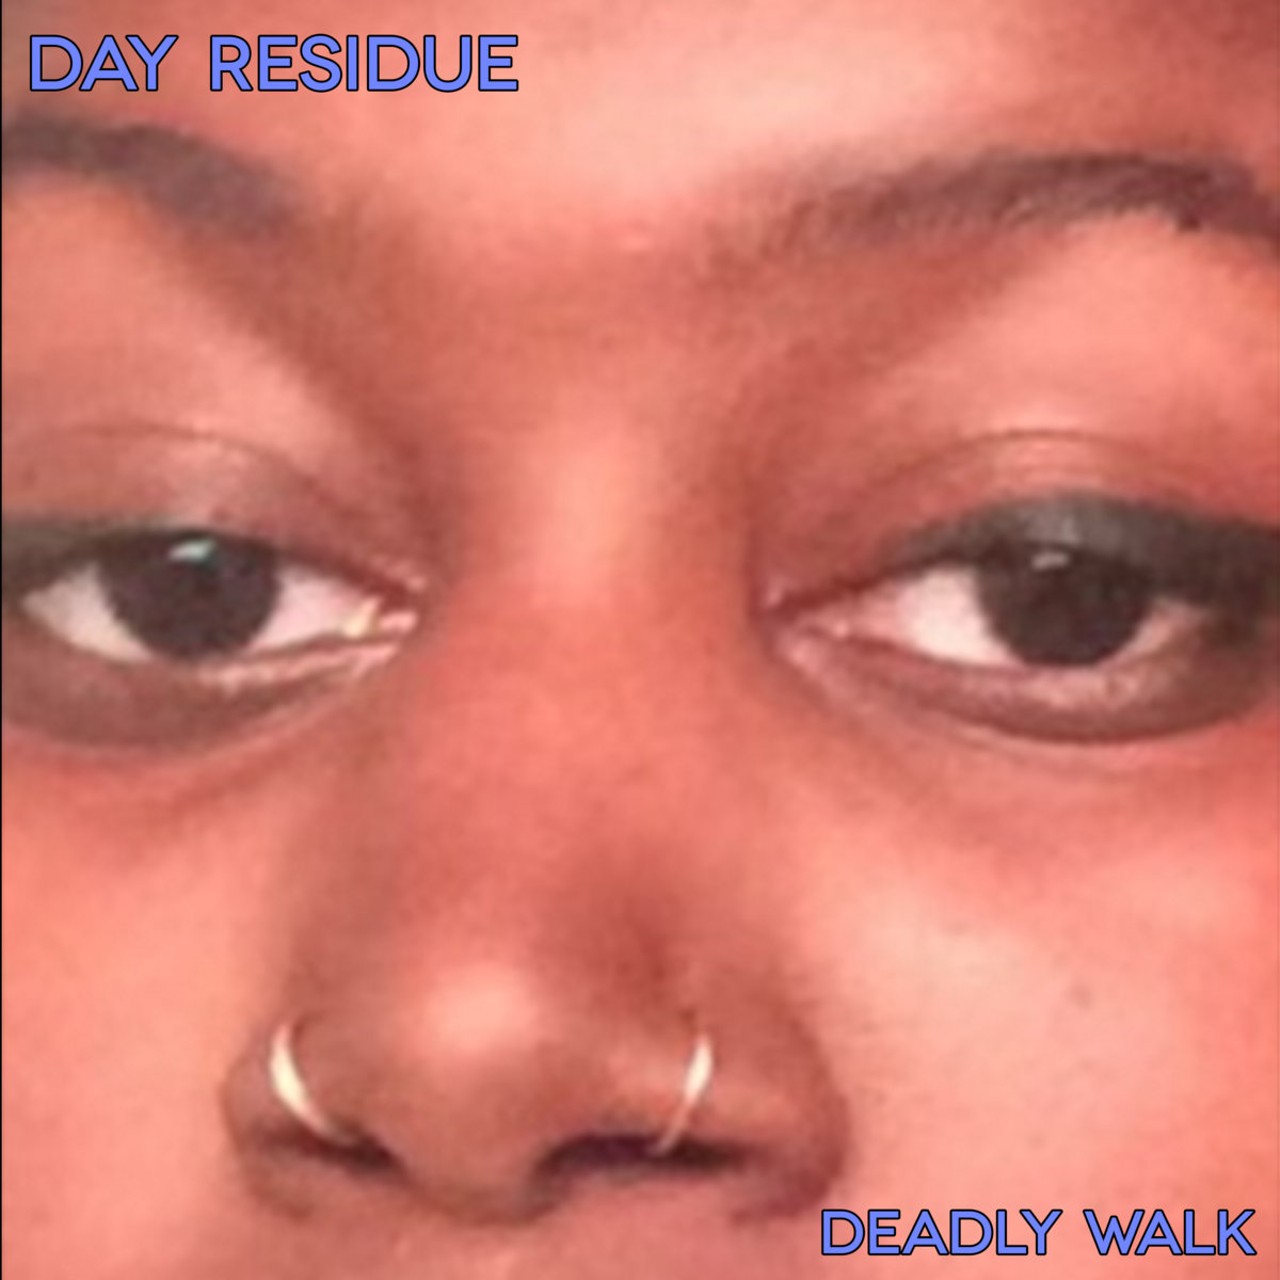 Day Residue: Deadly Walk EP
(self-released)
Detroit punk has had a pretty solid year in 2023, and Day Residue has been no small part of that momentum. They’ve only been together for a few years, but they’ve put together an impressive run of performances in that time, including opening for Protomartyr last year at the Magic Stick (lead singer Joe Casey also shouted them out in a Loud and Quiet interview earlier this year). Their latest EP Deadly Walk, released in November of this year, starts off with a bang; the title track swells with a siren-like sound before the band launches into a wall of noisy guitars and pounding drums, joined shortly thereafter by distorted vocals courtesy of lead-singer Aleahia. The EP has an interesting range in terms of structure and sound, particularly in the last two tracks with the all-out thrash of “Piss Paradise” juxtaposing nicely with the punchiness of “Insults for Sale.” This is a band to watch in 2024, so go grab the EP and catch a show sometime soon if you dare! —Broccoli